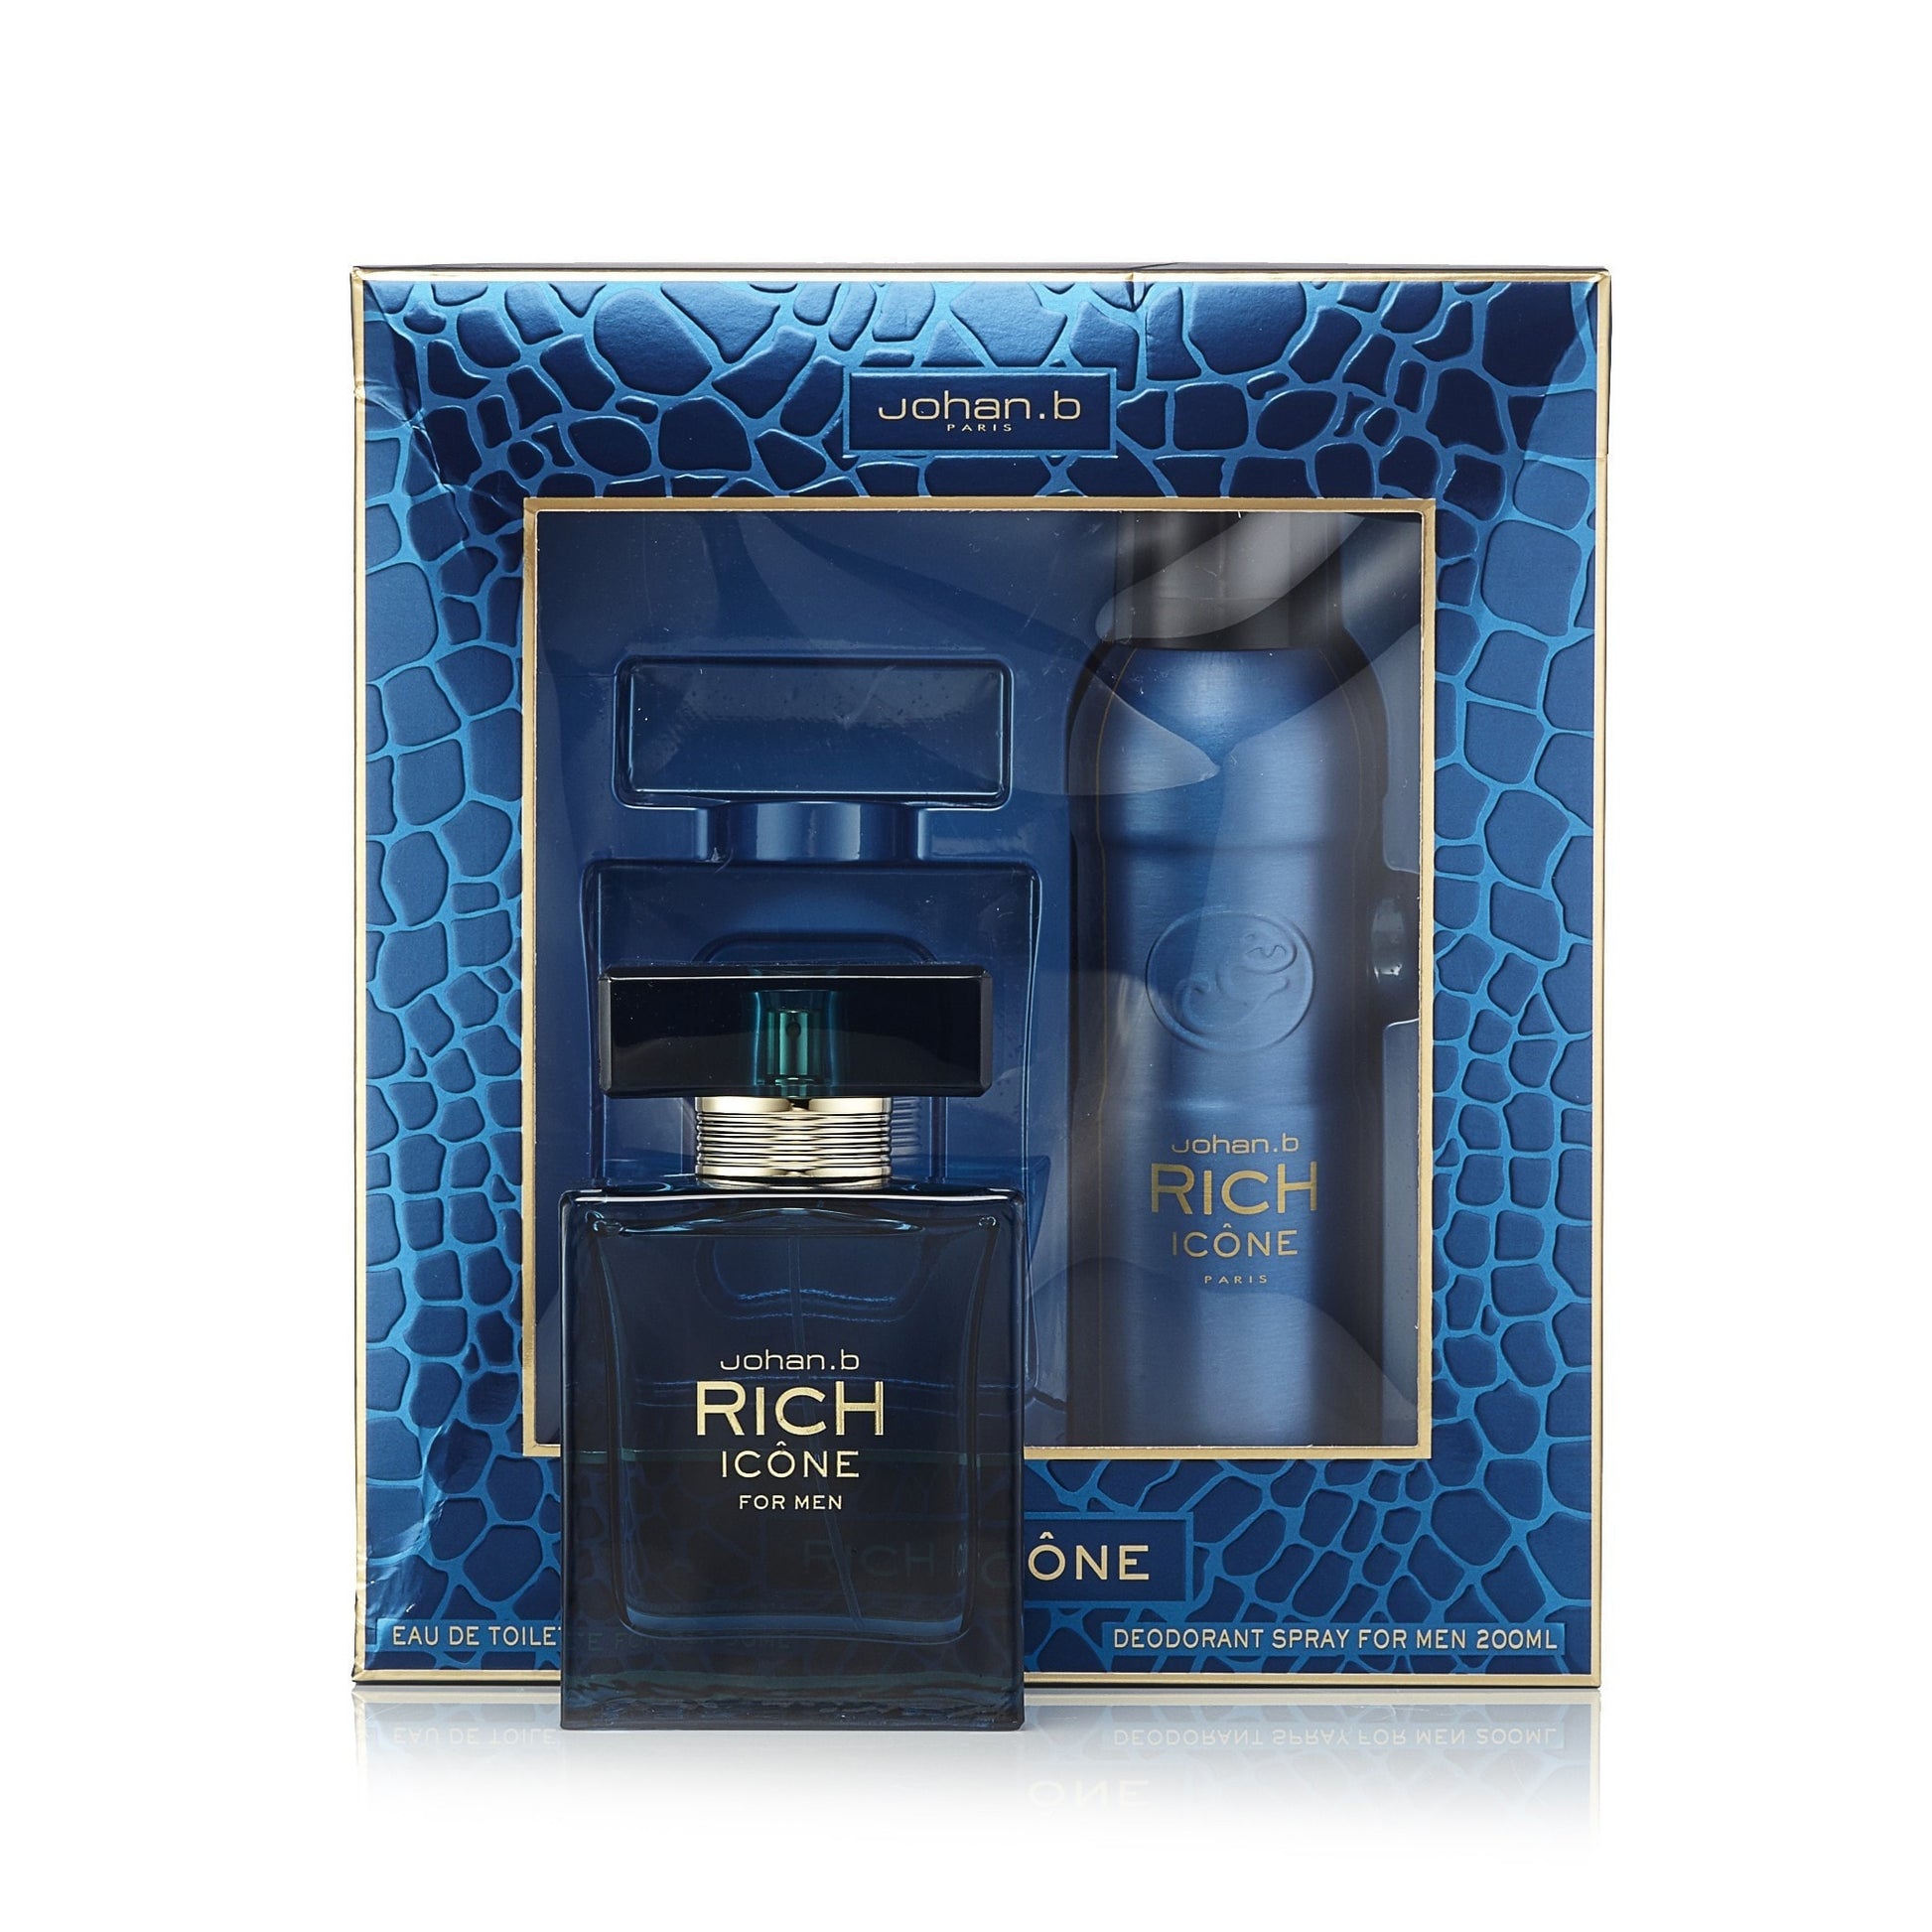 Rich Icone Gift Set for Men 3.0 oz. Click to open in modal